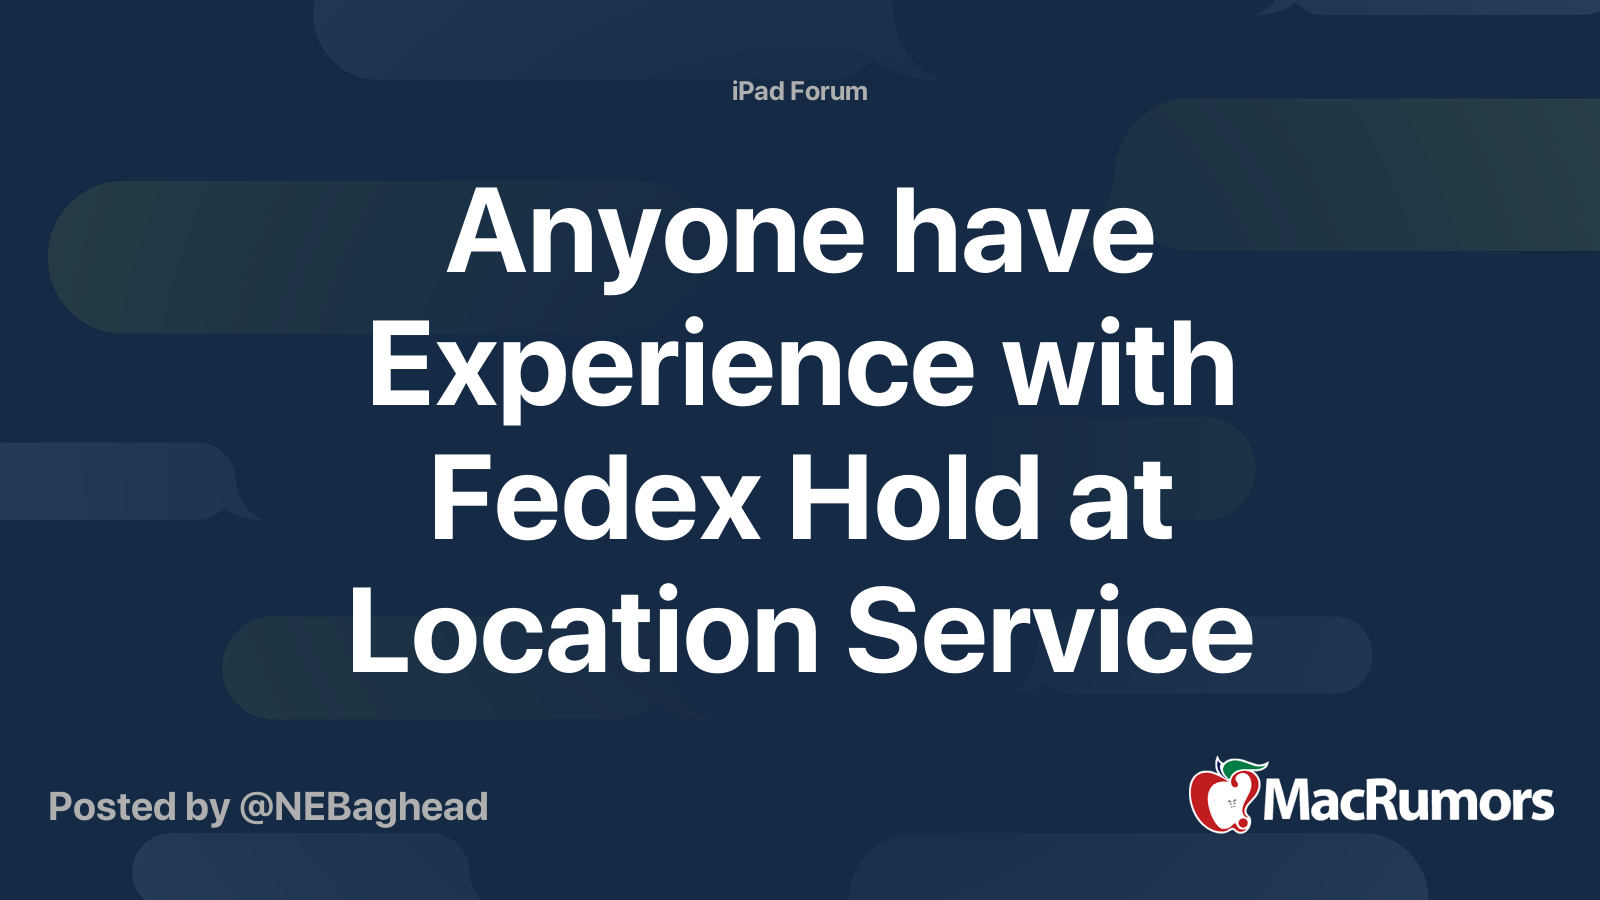 Anyone have Experience with Fedex Hold at Location Service